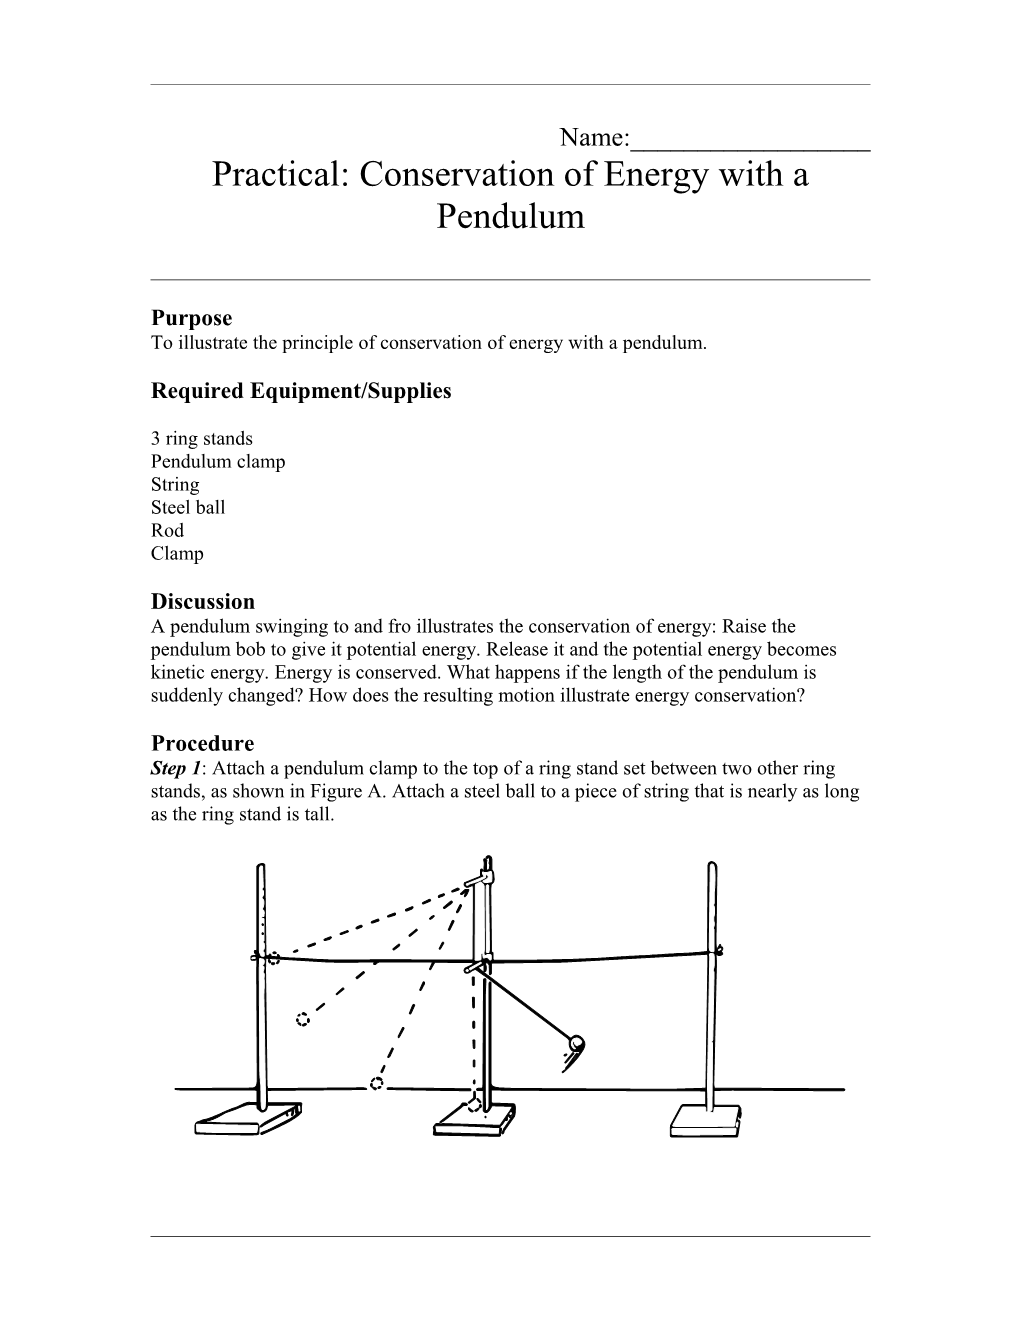 Practical: Conservation of Energy with a Pendulum